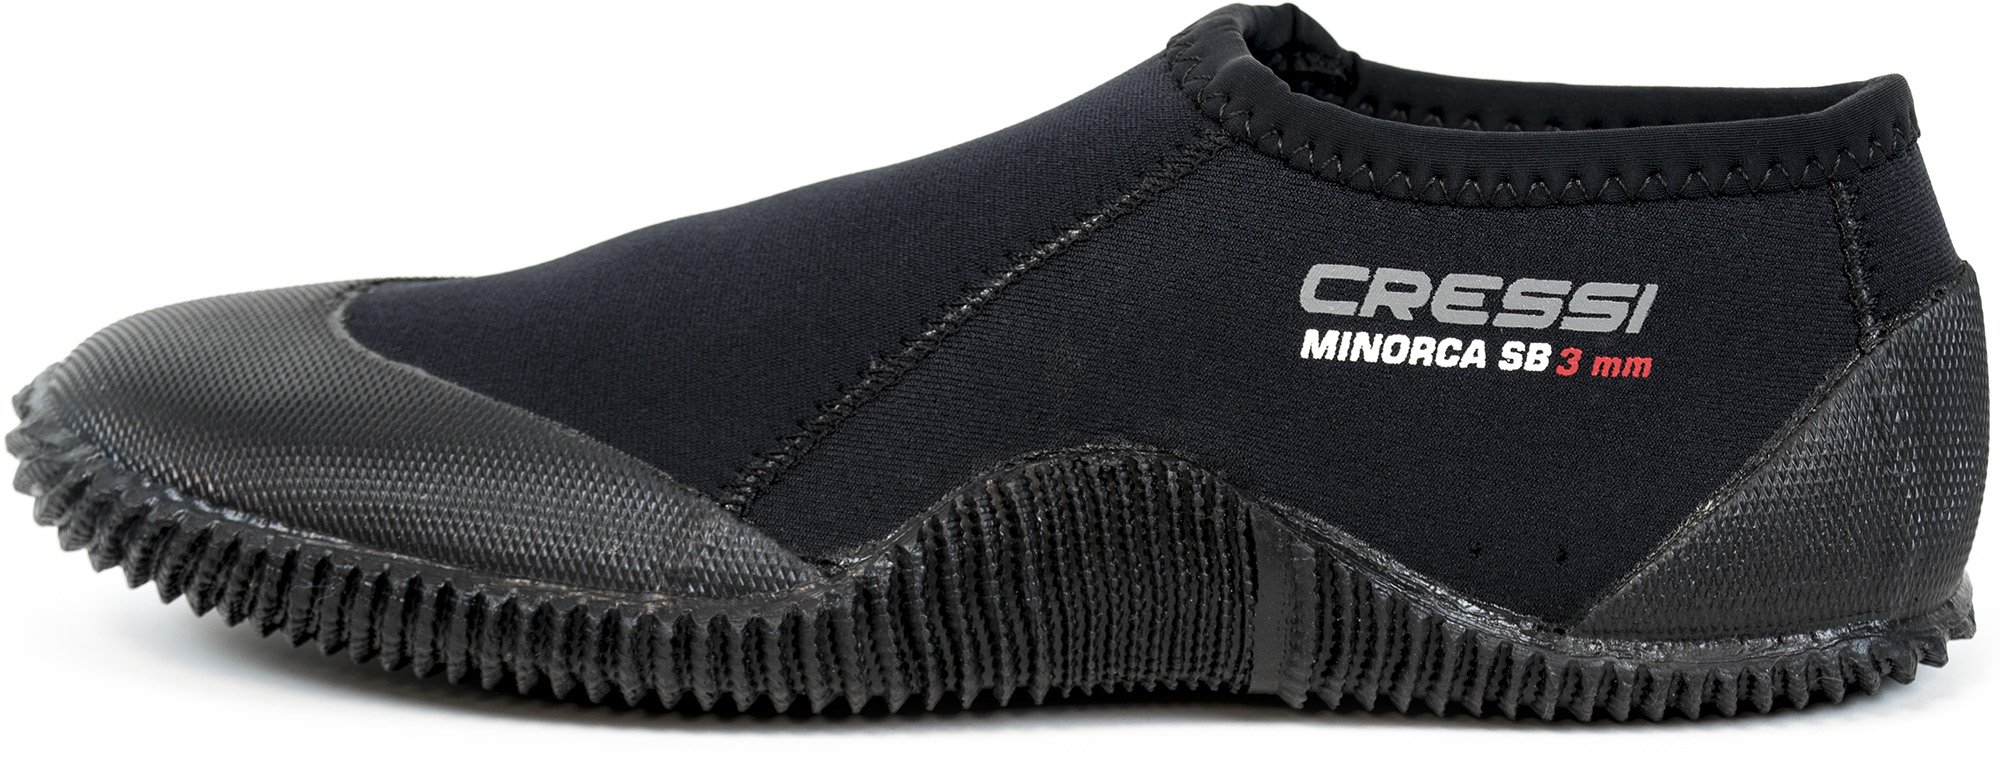 Cressi Neoprene Adult Anti-Slip Sole Boots - for Water Sports: Scuba Diving: Snorkeling, Diving, Rafting, Windsurfing - Minorca Short: designed in Italy